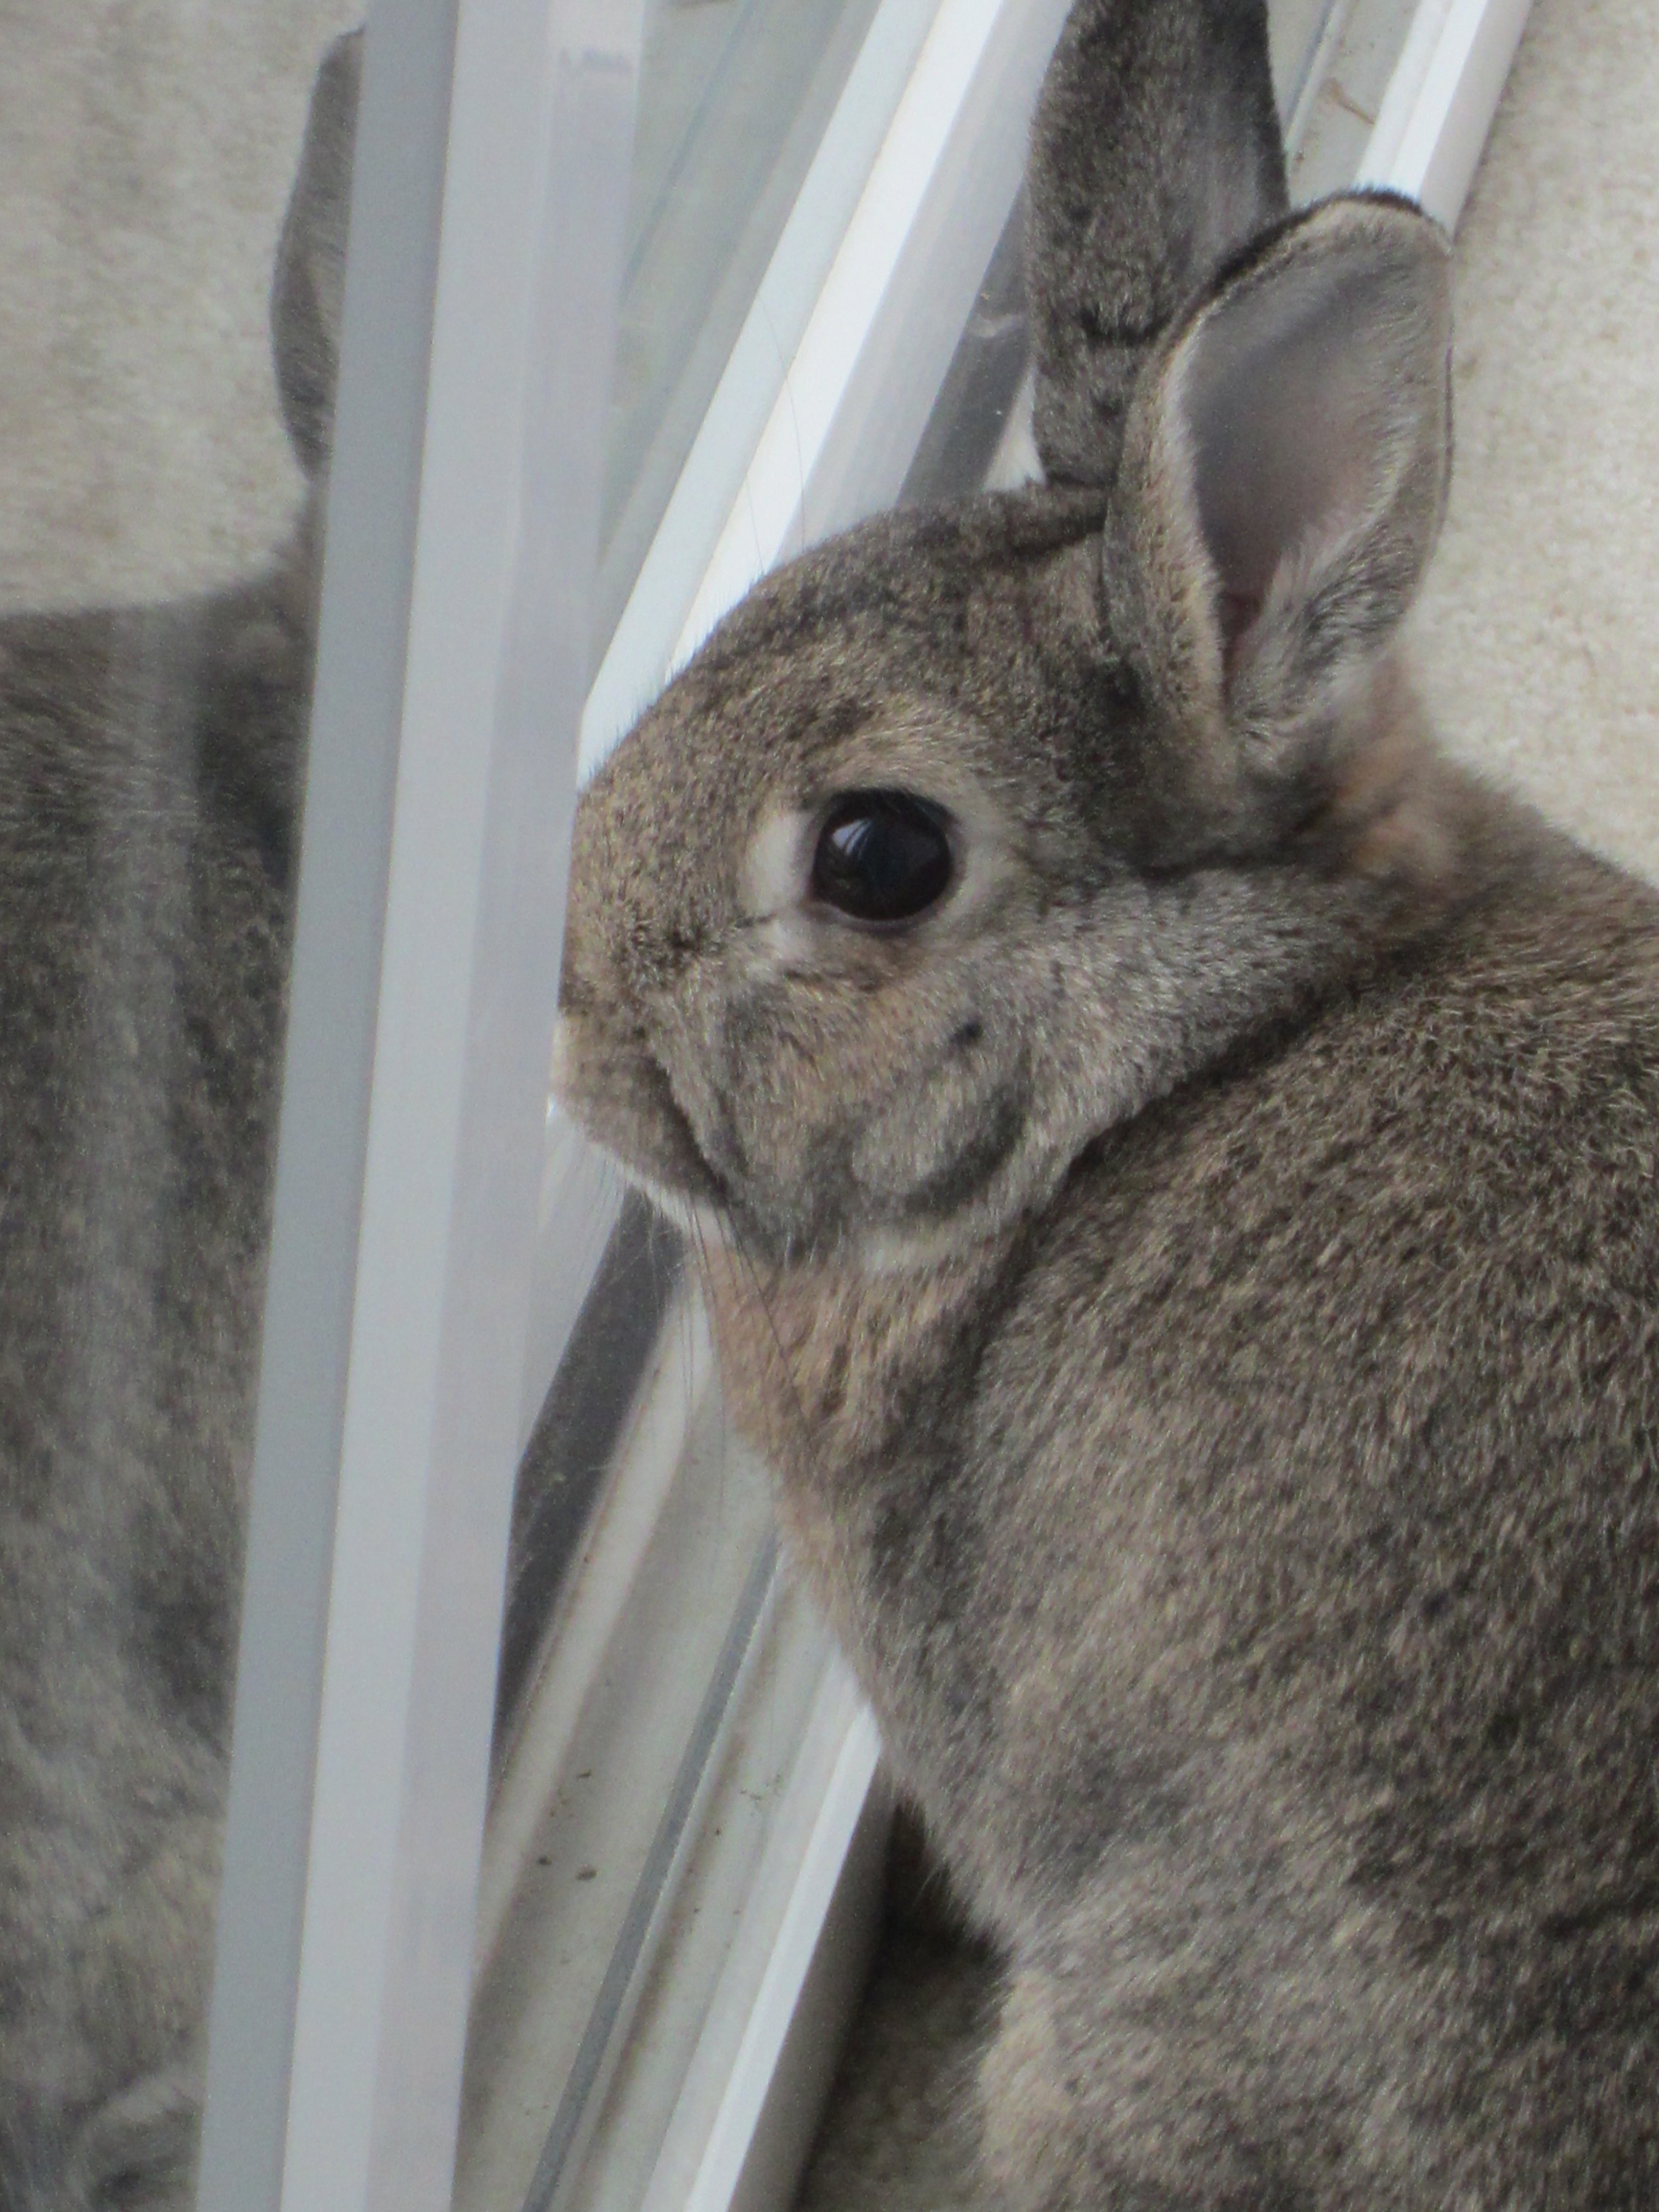 Bunny Loves Looking Out the Window 2